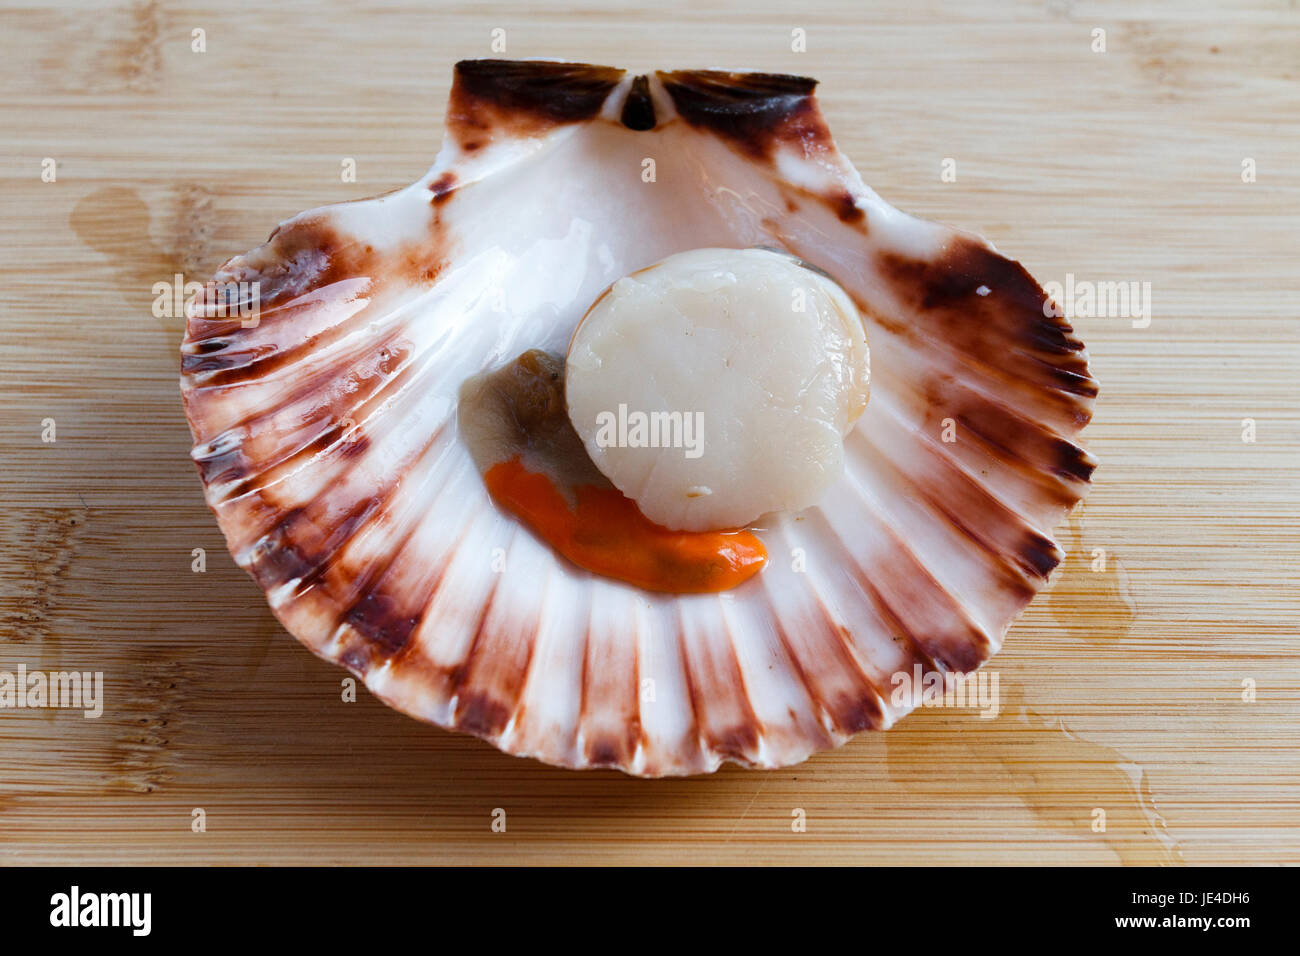 Scallops In Shell High Resolution Stock Photography and Images - Alamy